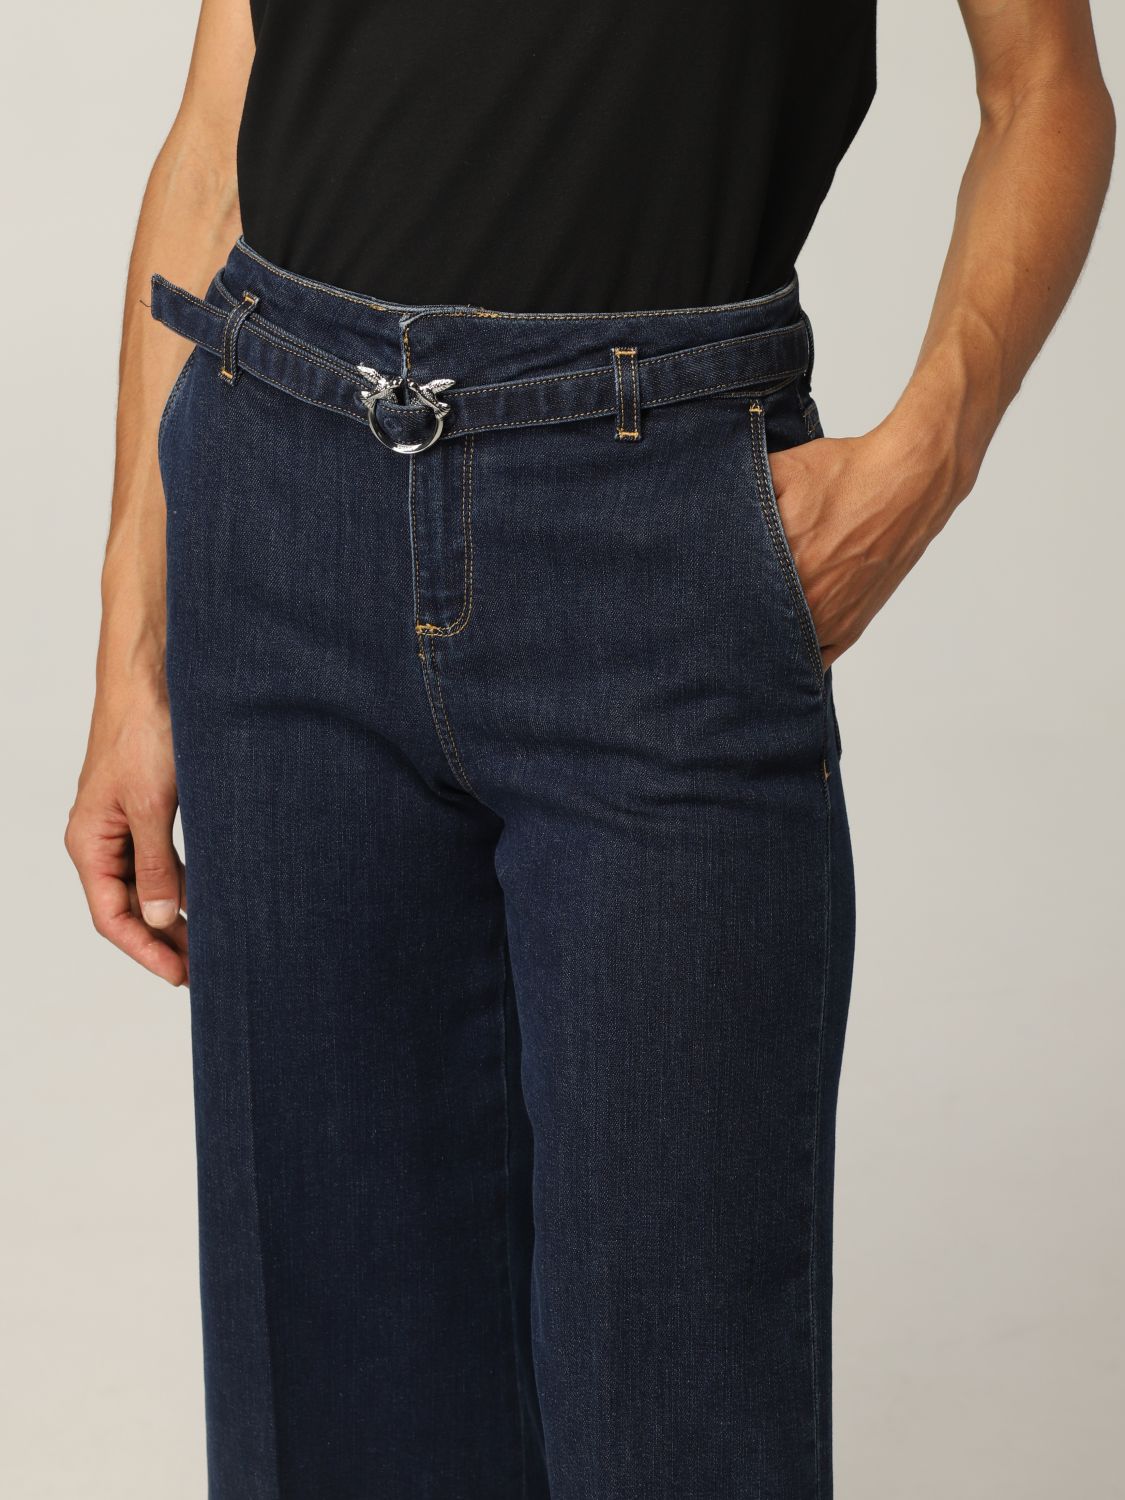 Jeans Pinko: Peggy Pinko jeans with belt and Love Birds buckle black 3